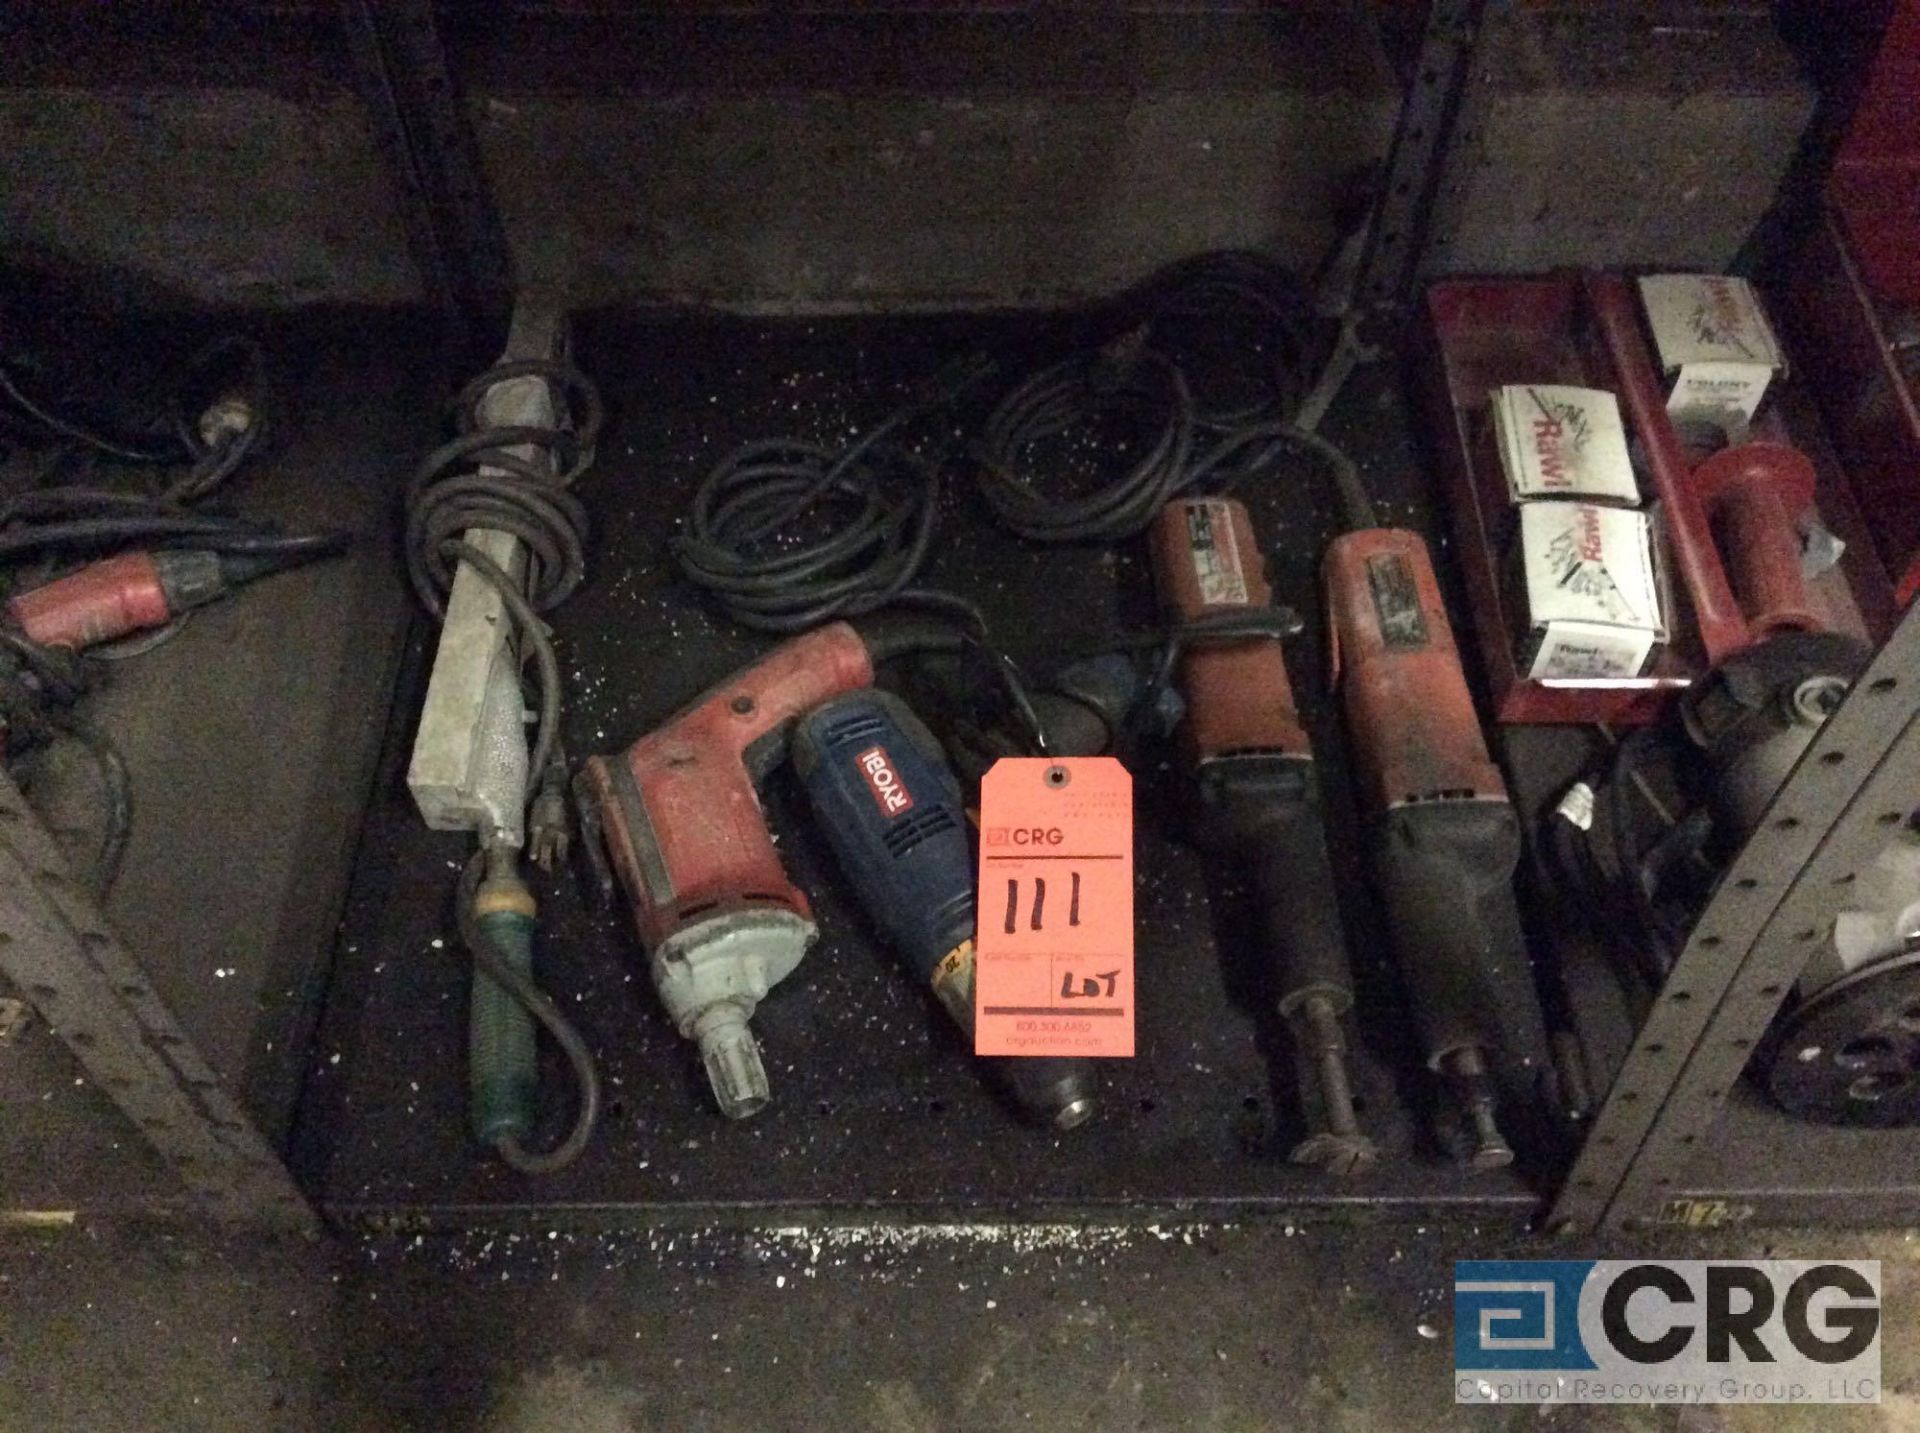 Lot of asst electric hand tools including drills, router, die grinders and impact gun - Image 2 of 3